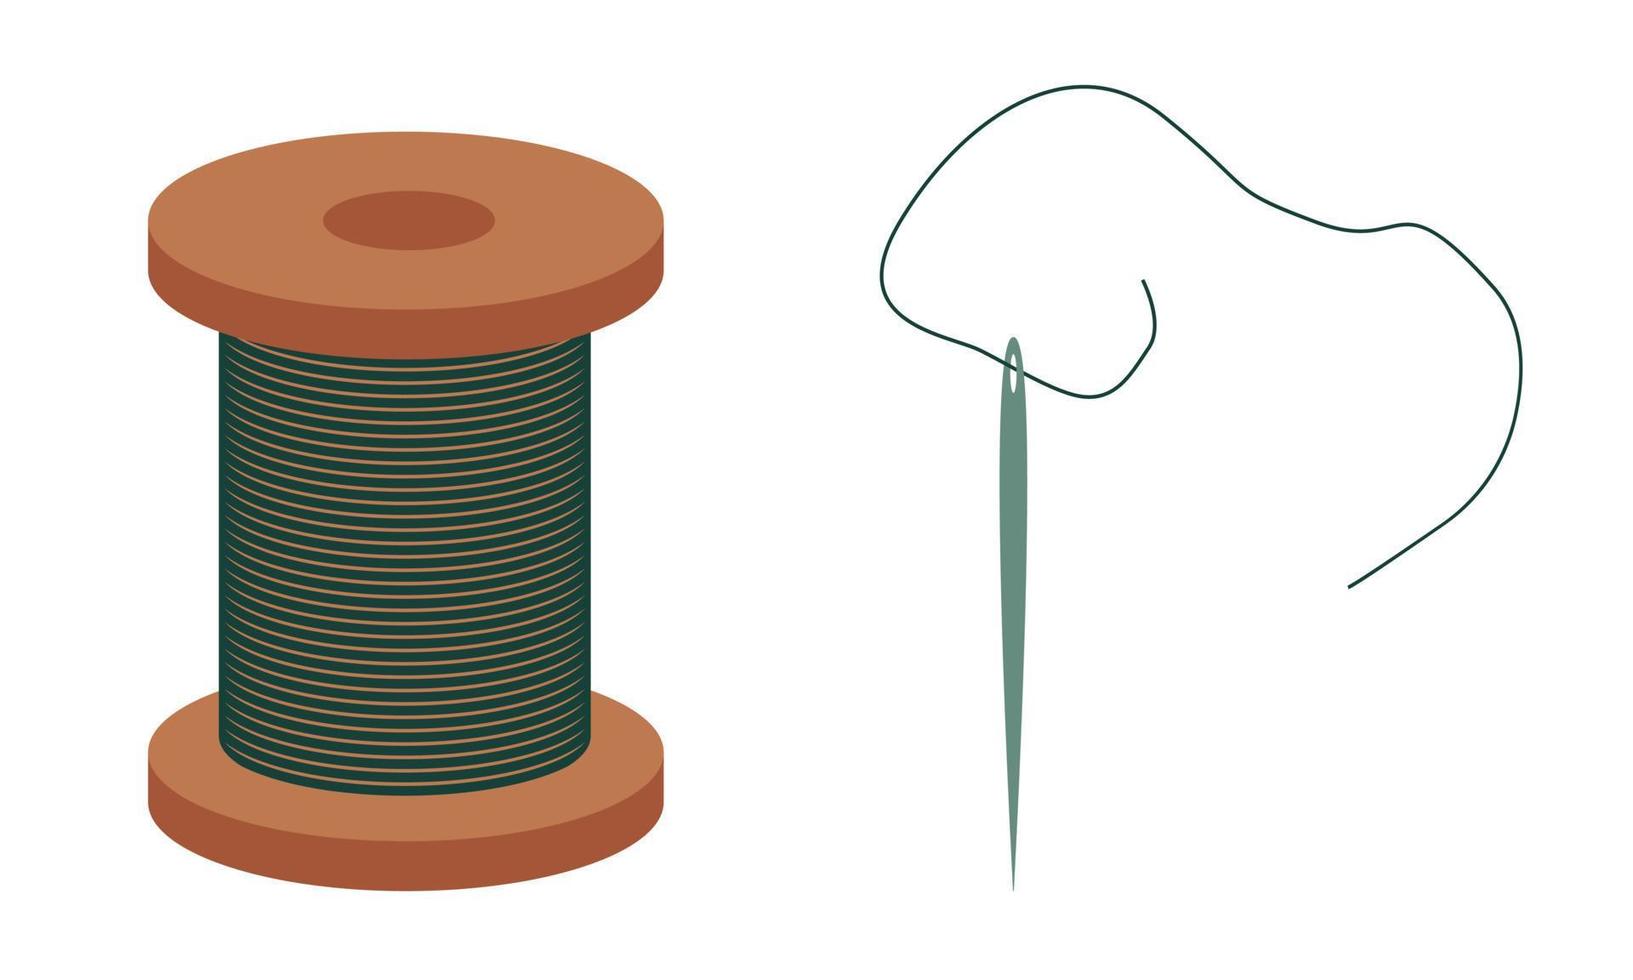 Spool of thread and a sewing needle. Tools for sewing clothes and embroidery. Hobby and craft items. Flat style. Vector illustration